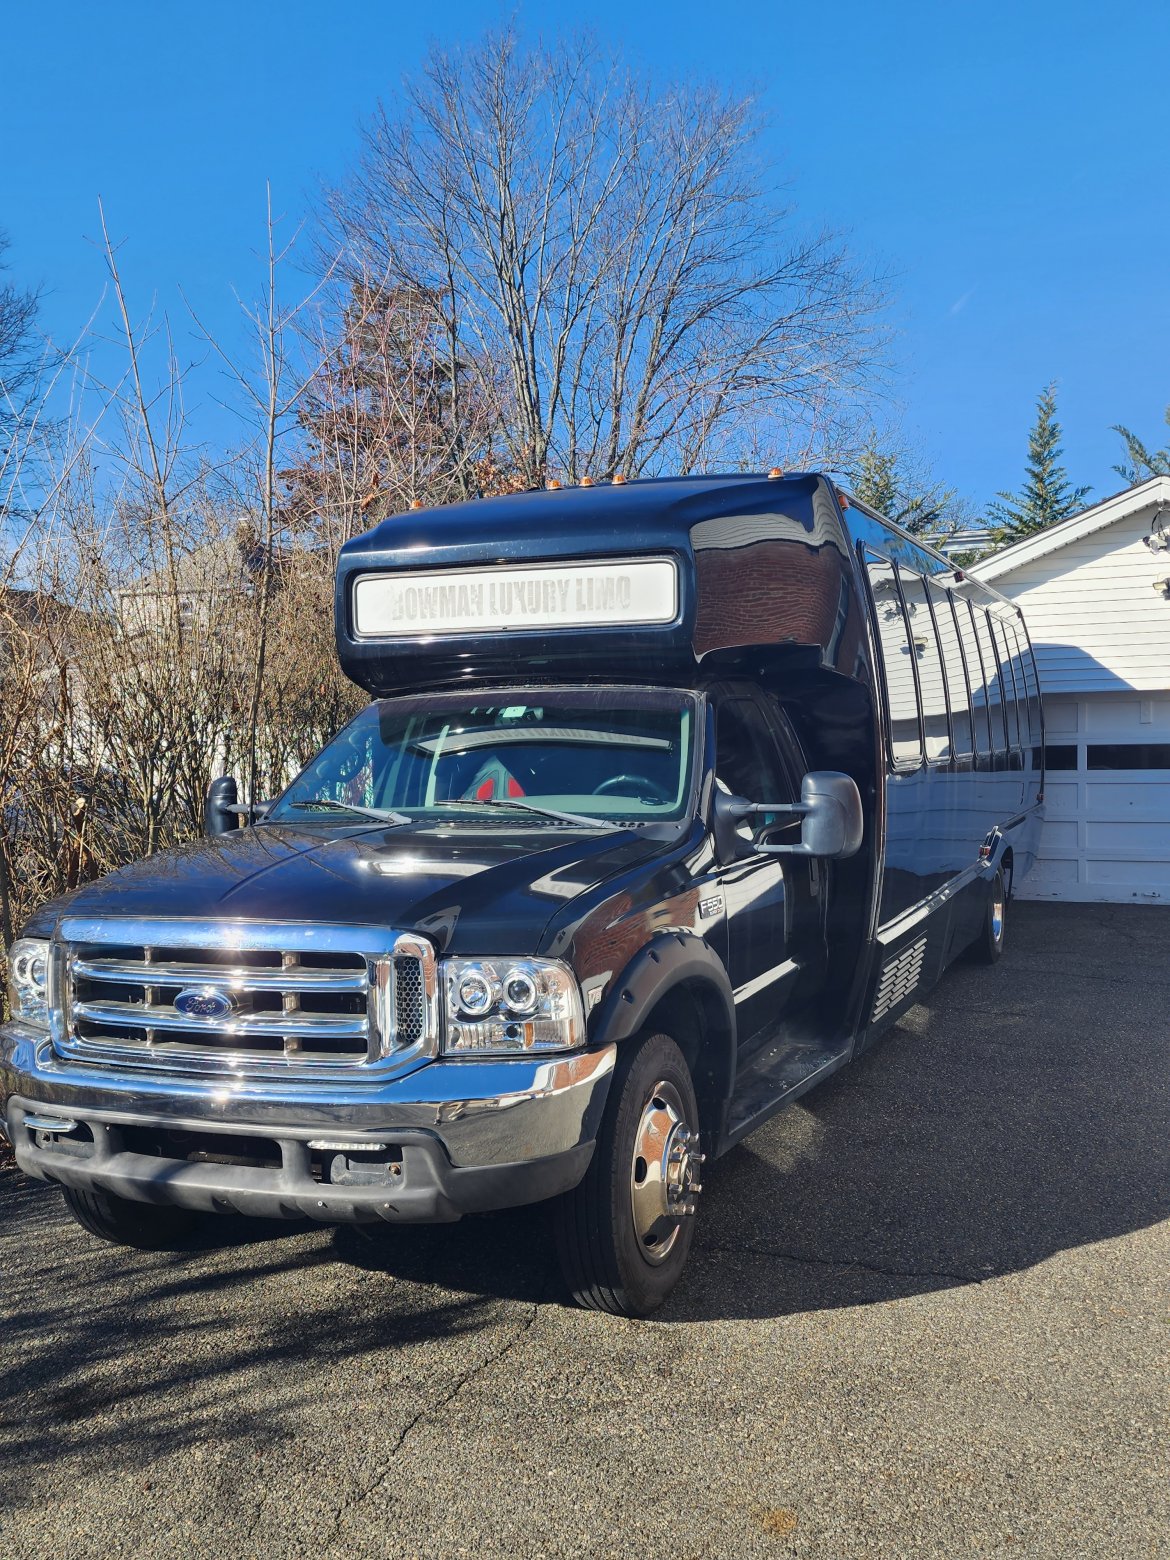 1999 Krystal Ford F550 Limo Bus For Sale